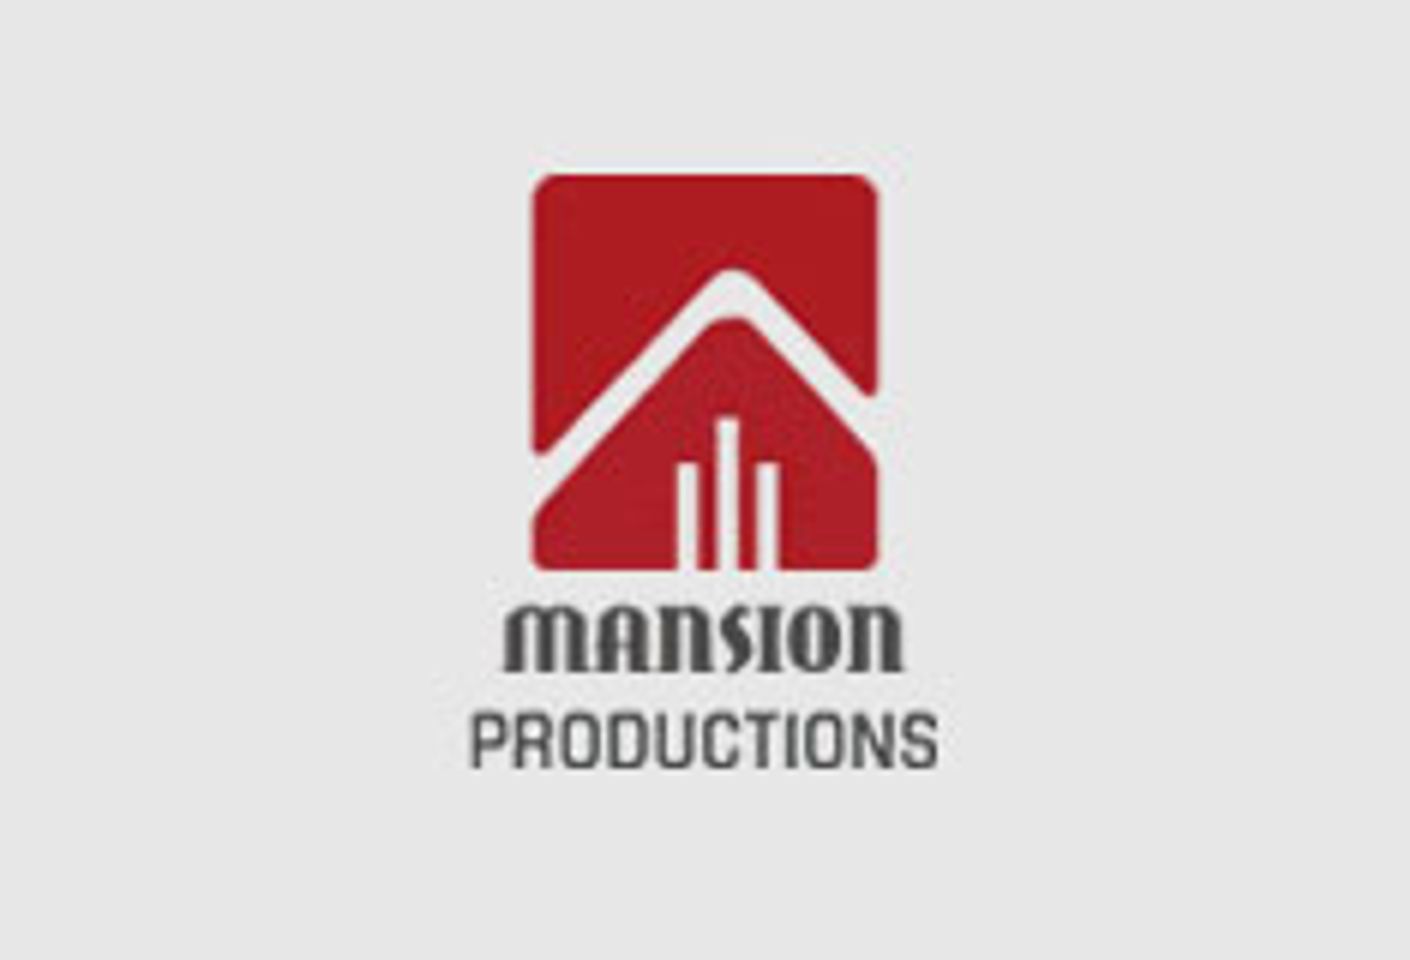 Mansion Productions Terminates User License, Releases Acceptable Use Statement